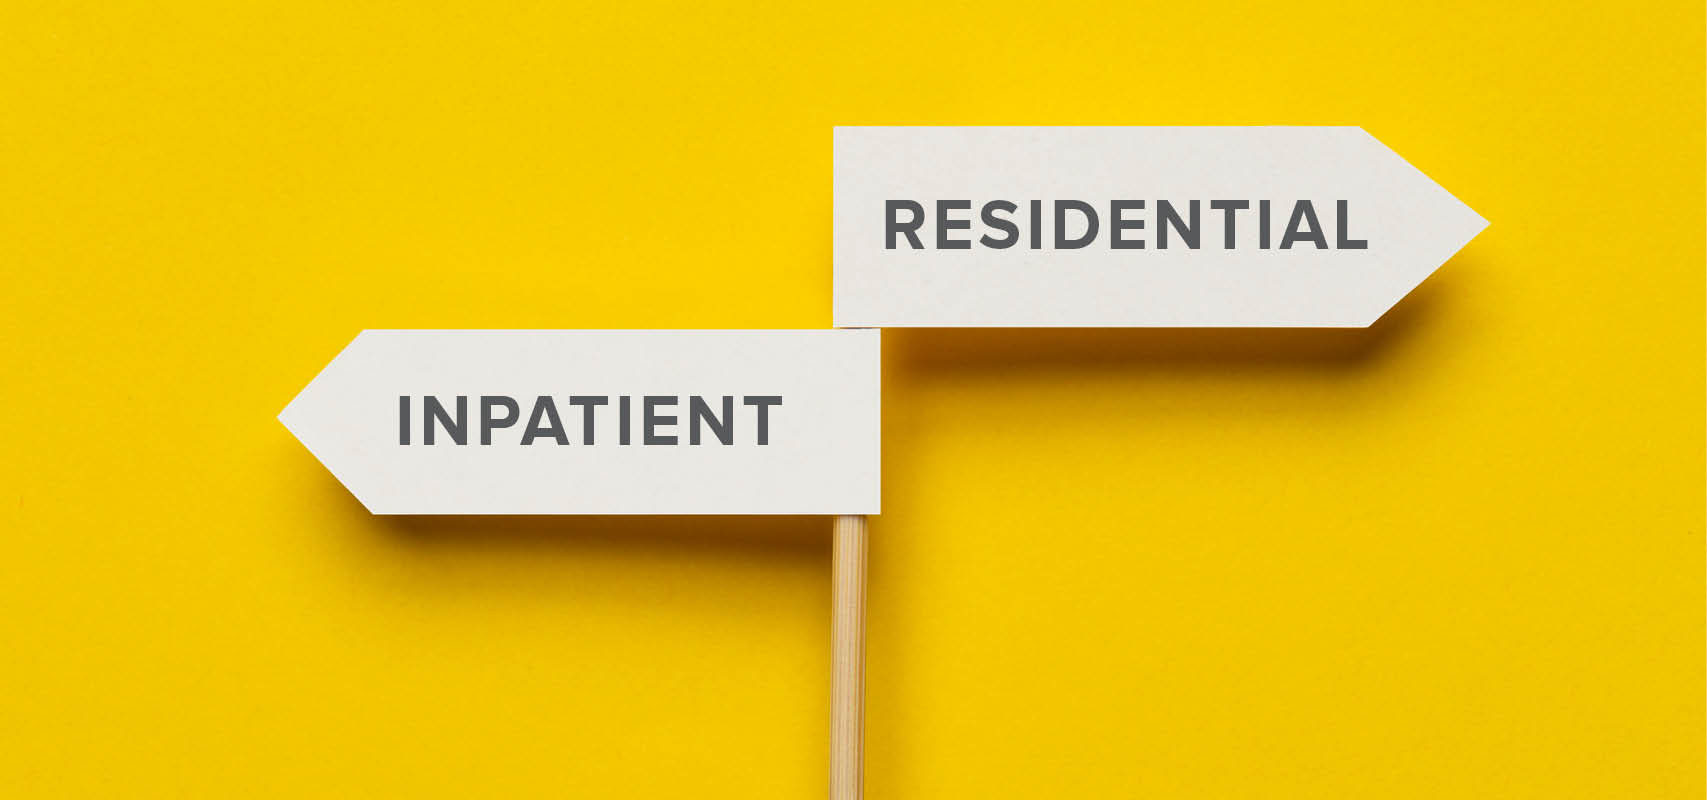 Photo illustration of a sign pointing in opposite directions with the choices for Inpatient or Residential care